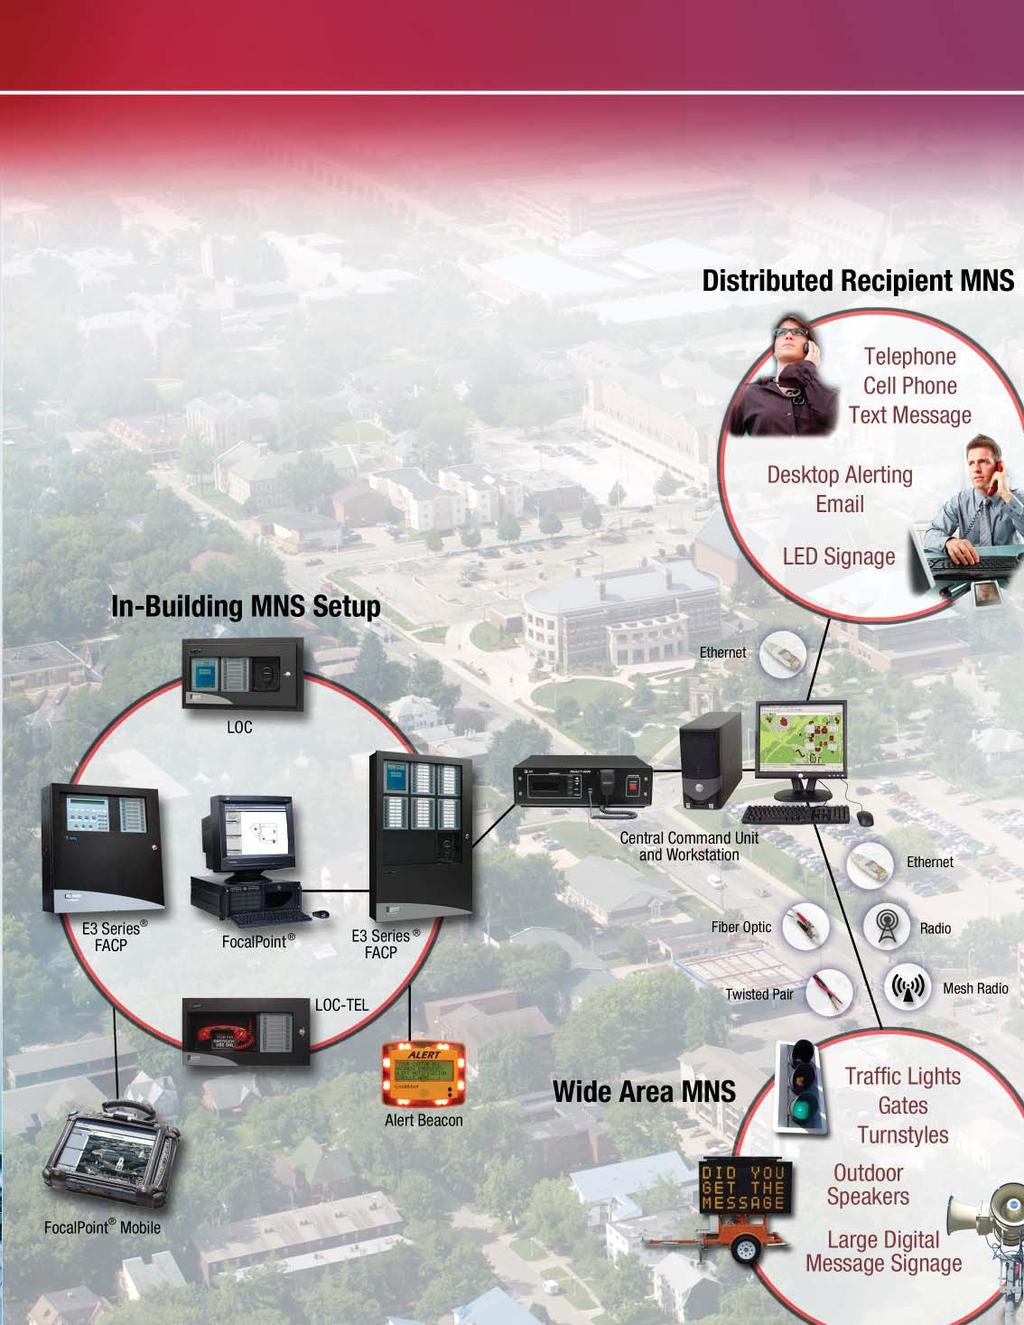 The E3 Series Solution for a Complete Emergency Communication System When communicating to a broad population spread out over miles of a facility, conveying clear concise messages becomes a challenge.